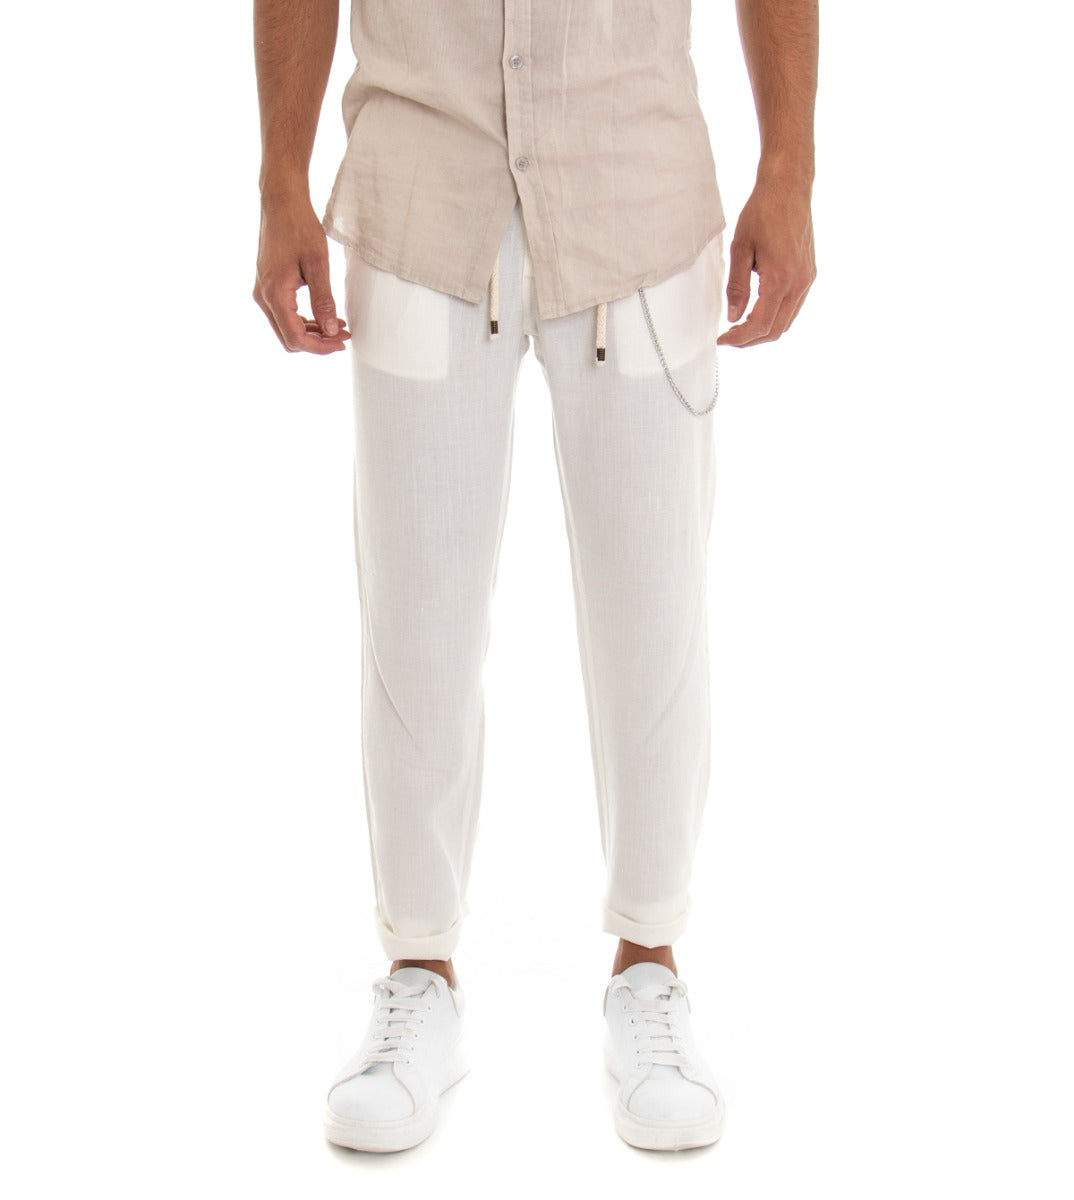 Equipe Men's Trousers Solid Color White Linen Drawstring GIOSAL